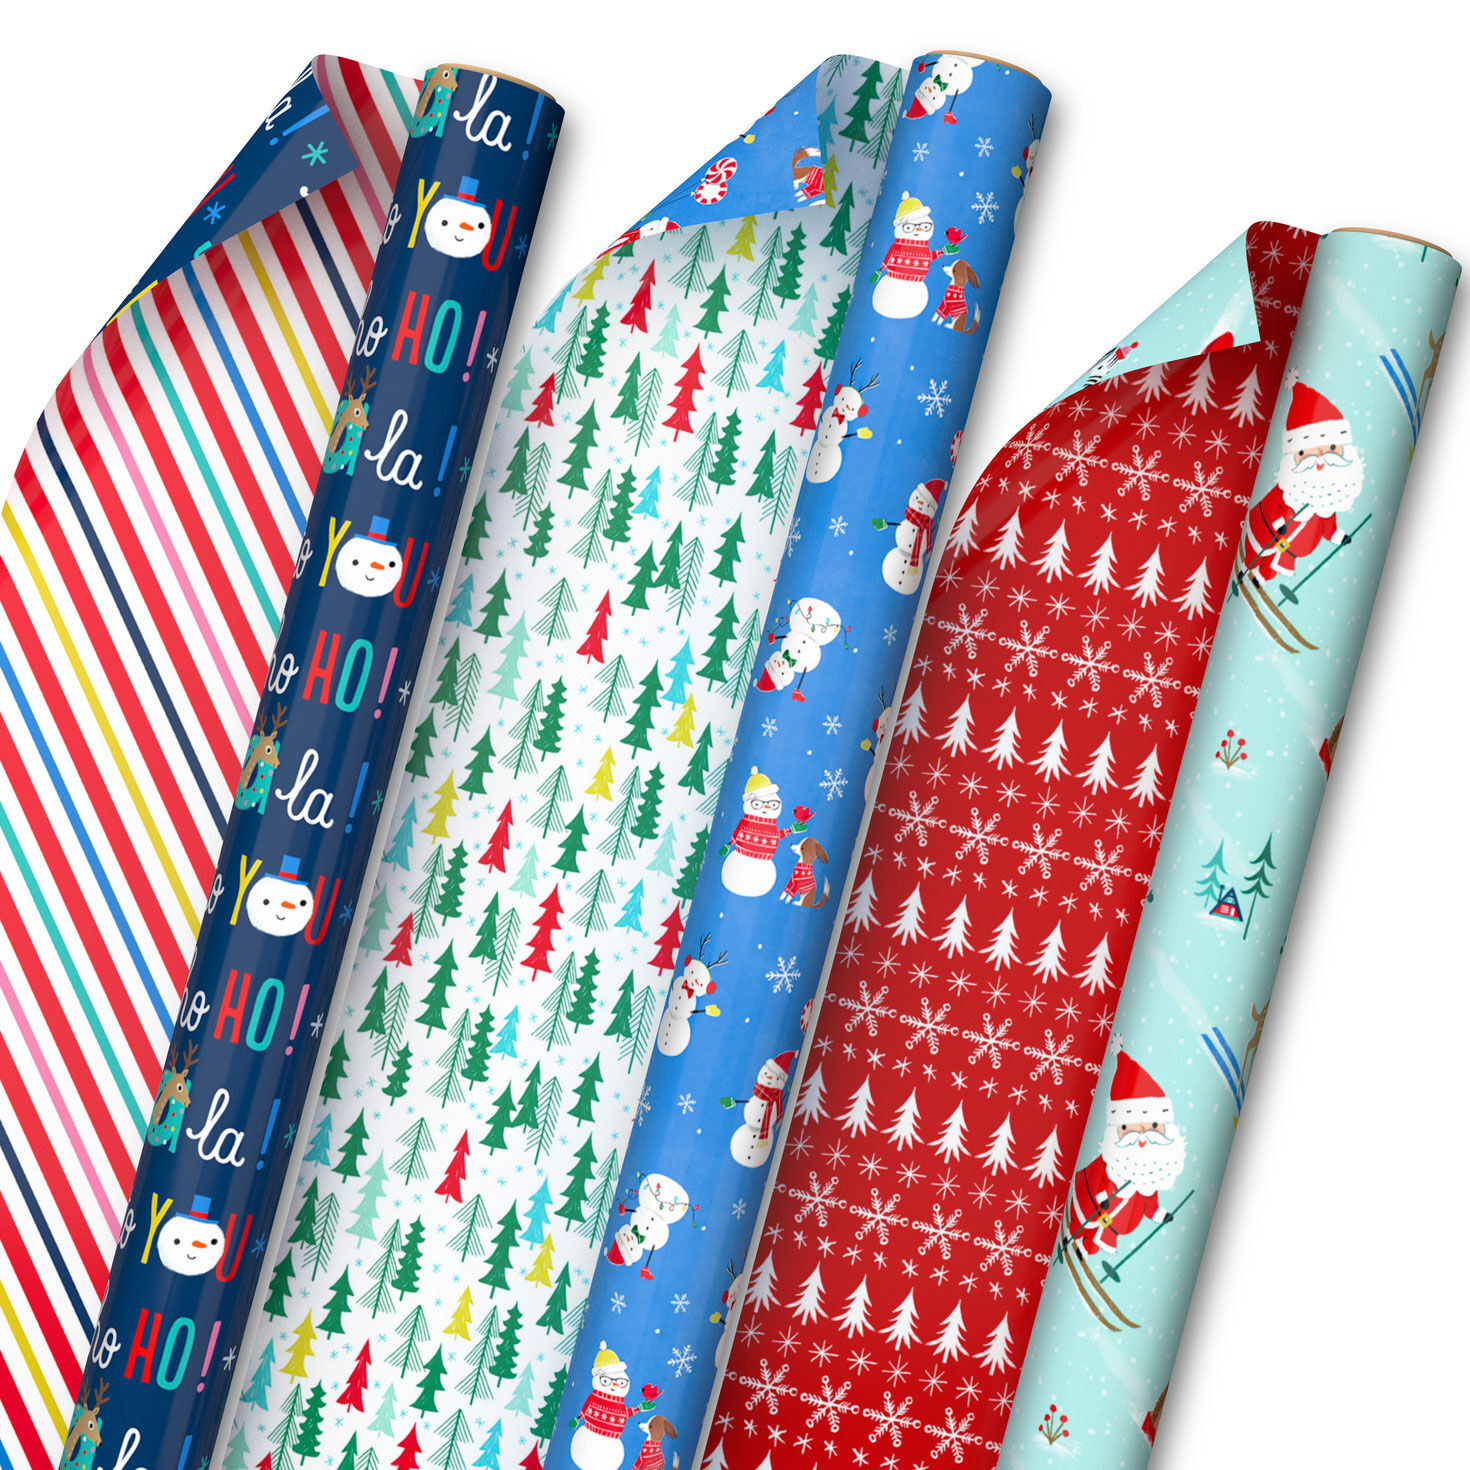  Hallmark Reversible Christmas Wrapping Paper for Kids